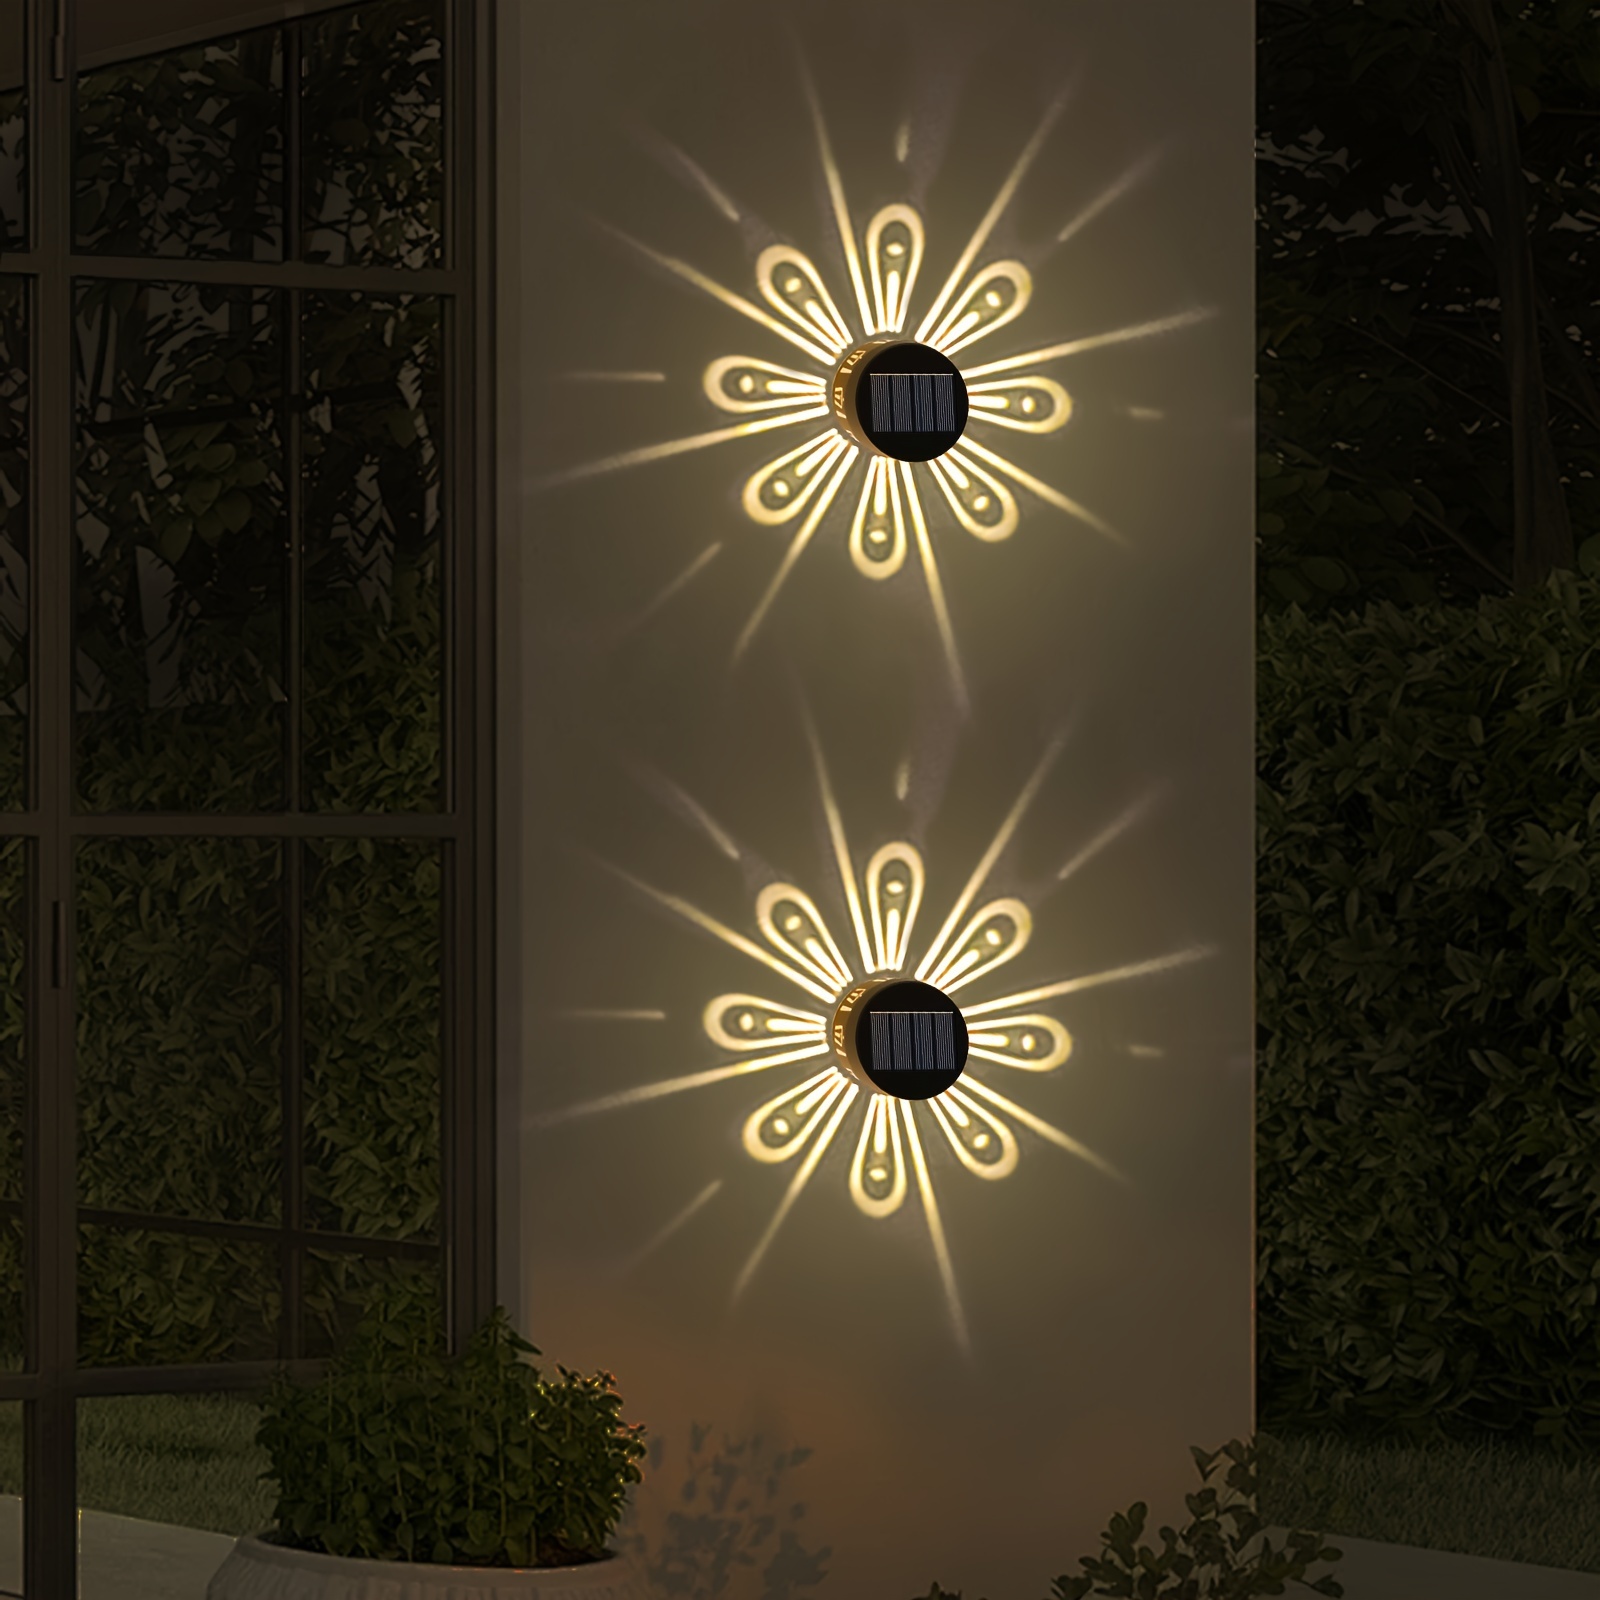 

2 Solar Wall Lights, Solar Outdoor Fence Lights, Suitable For Porch Deck Fence Courtyard Front Door Stairs Warm White Decoration Lighting From Dusk To Dawn.